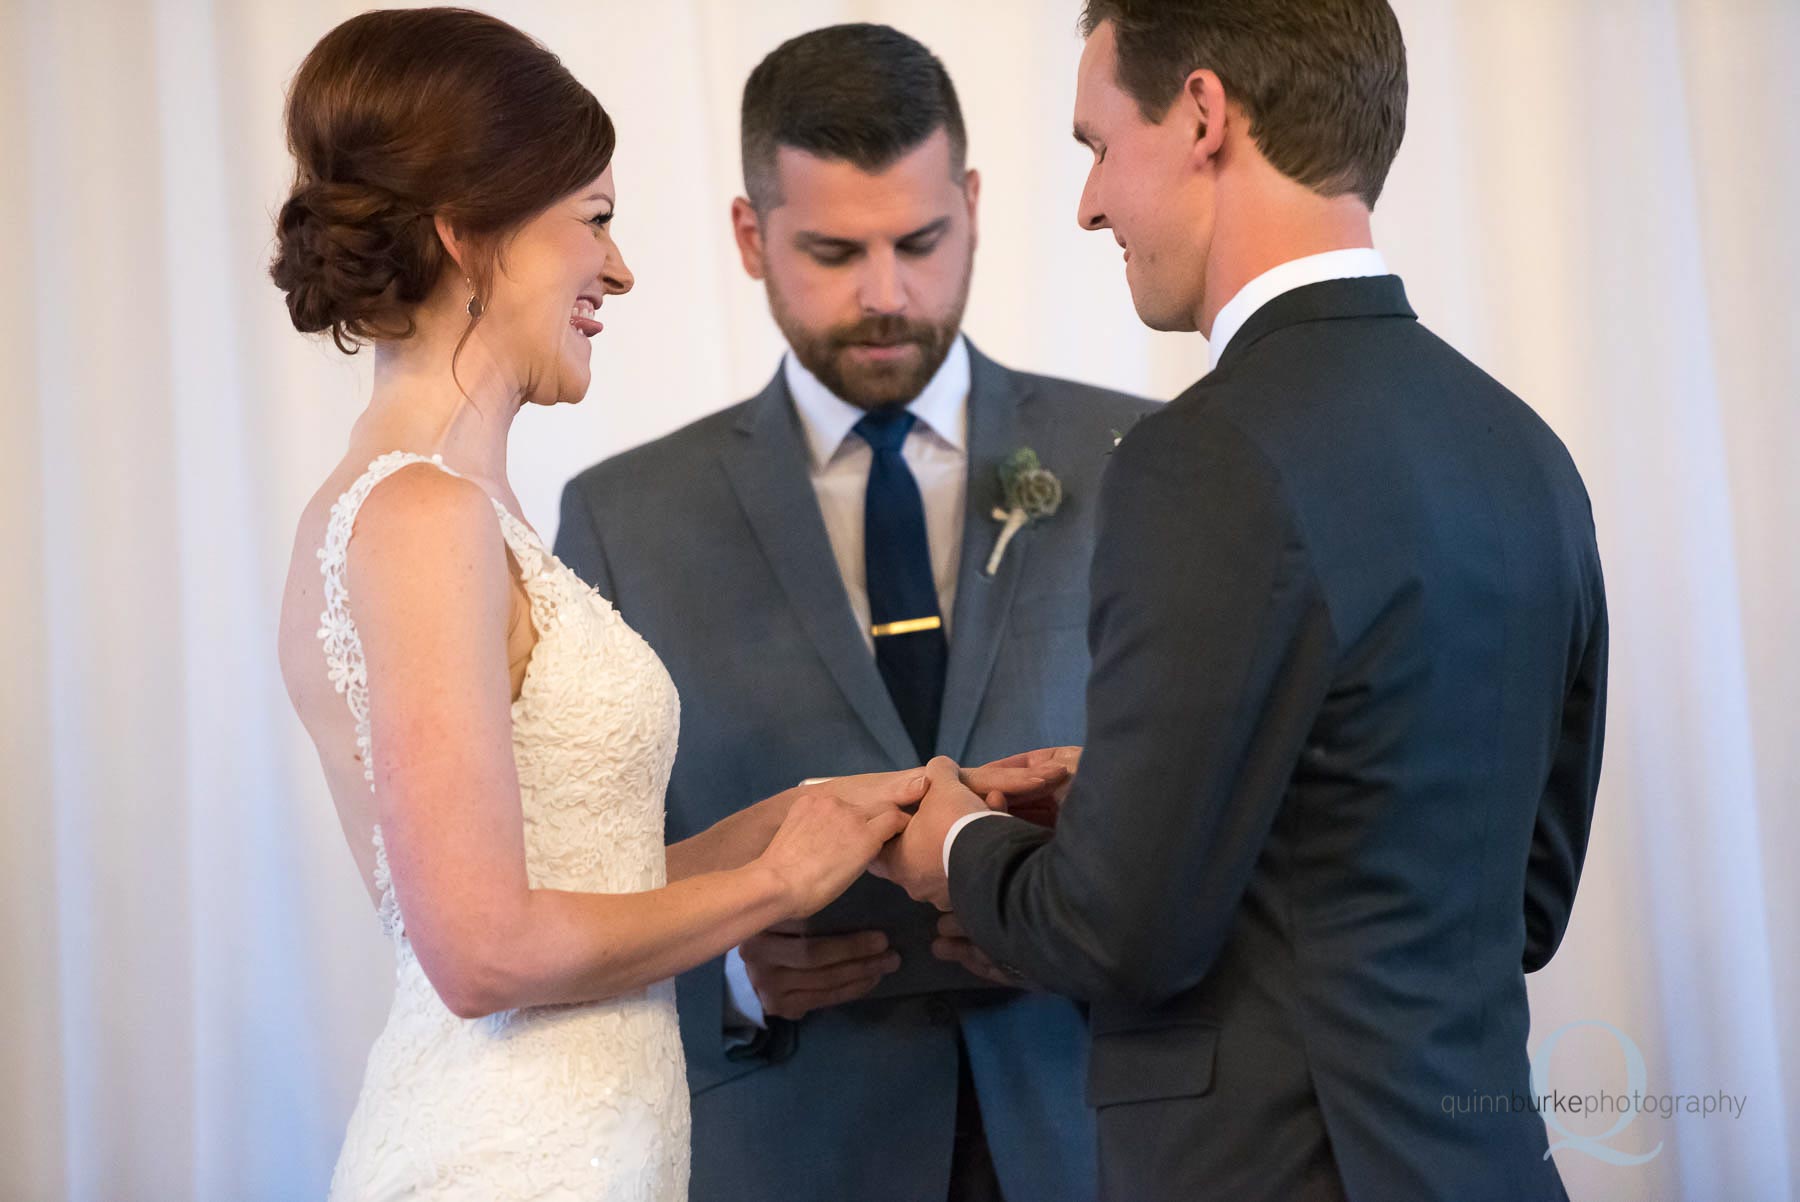 groom placing ring on brides finger during wedding ceremony